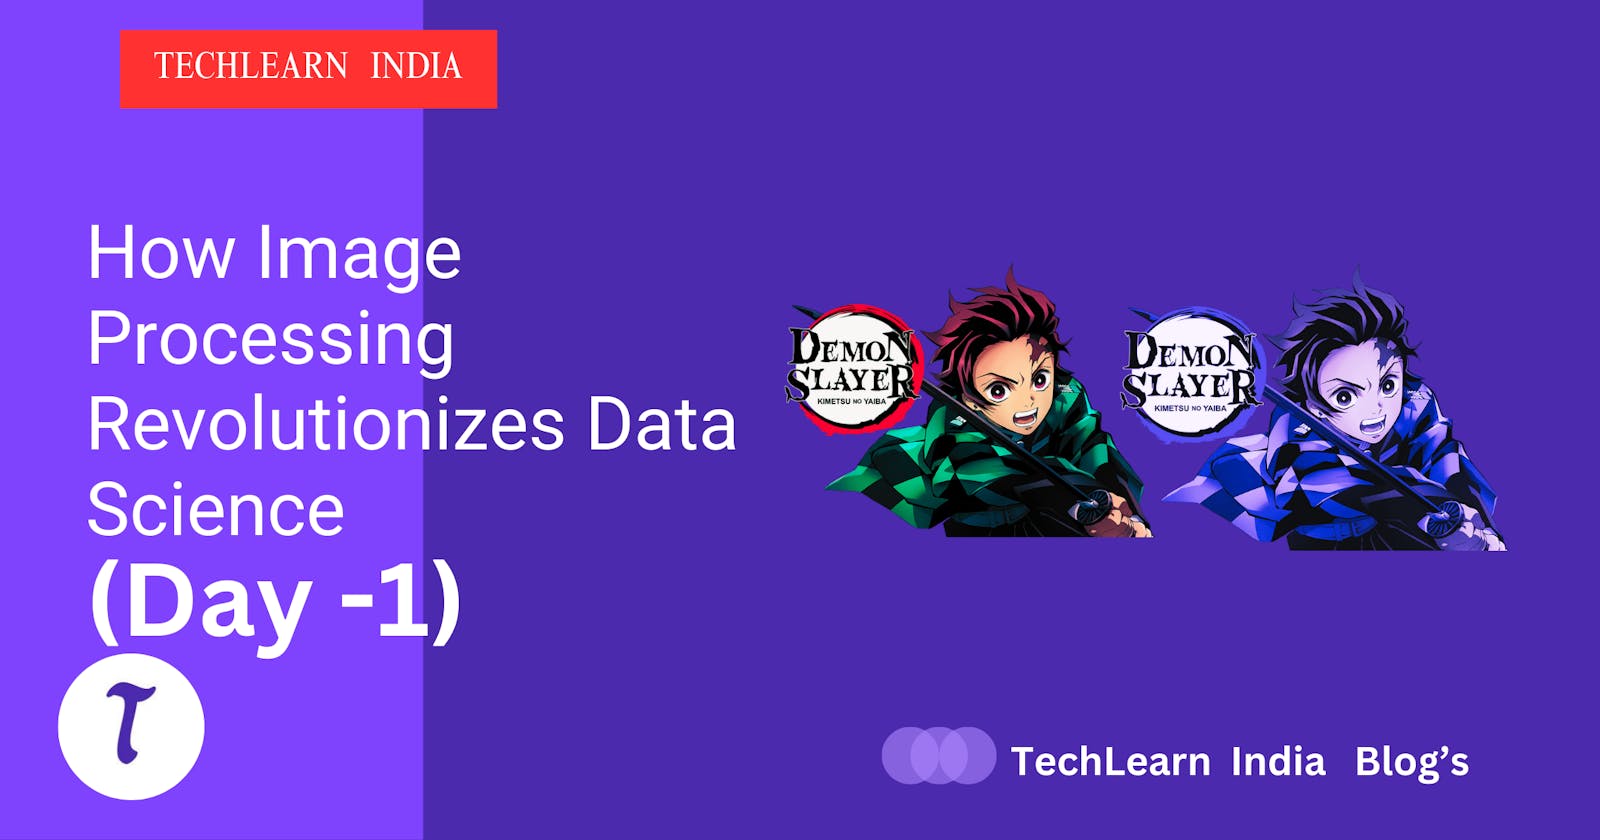 How Image Processing Revolutionizes Data Science (Day -1)